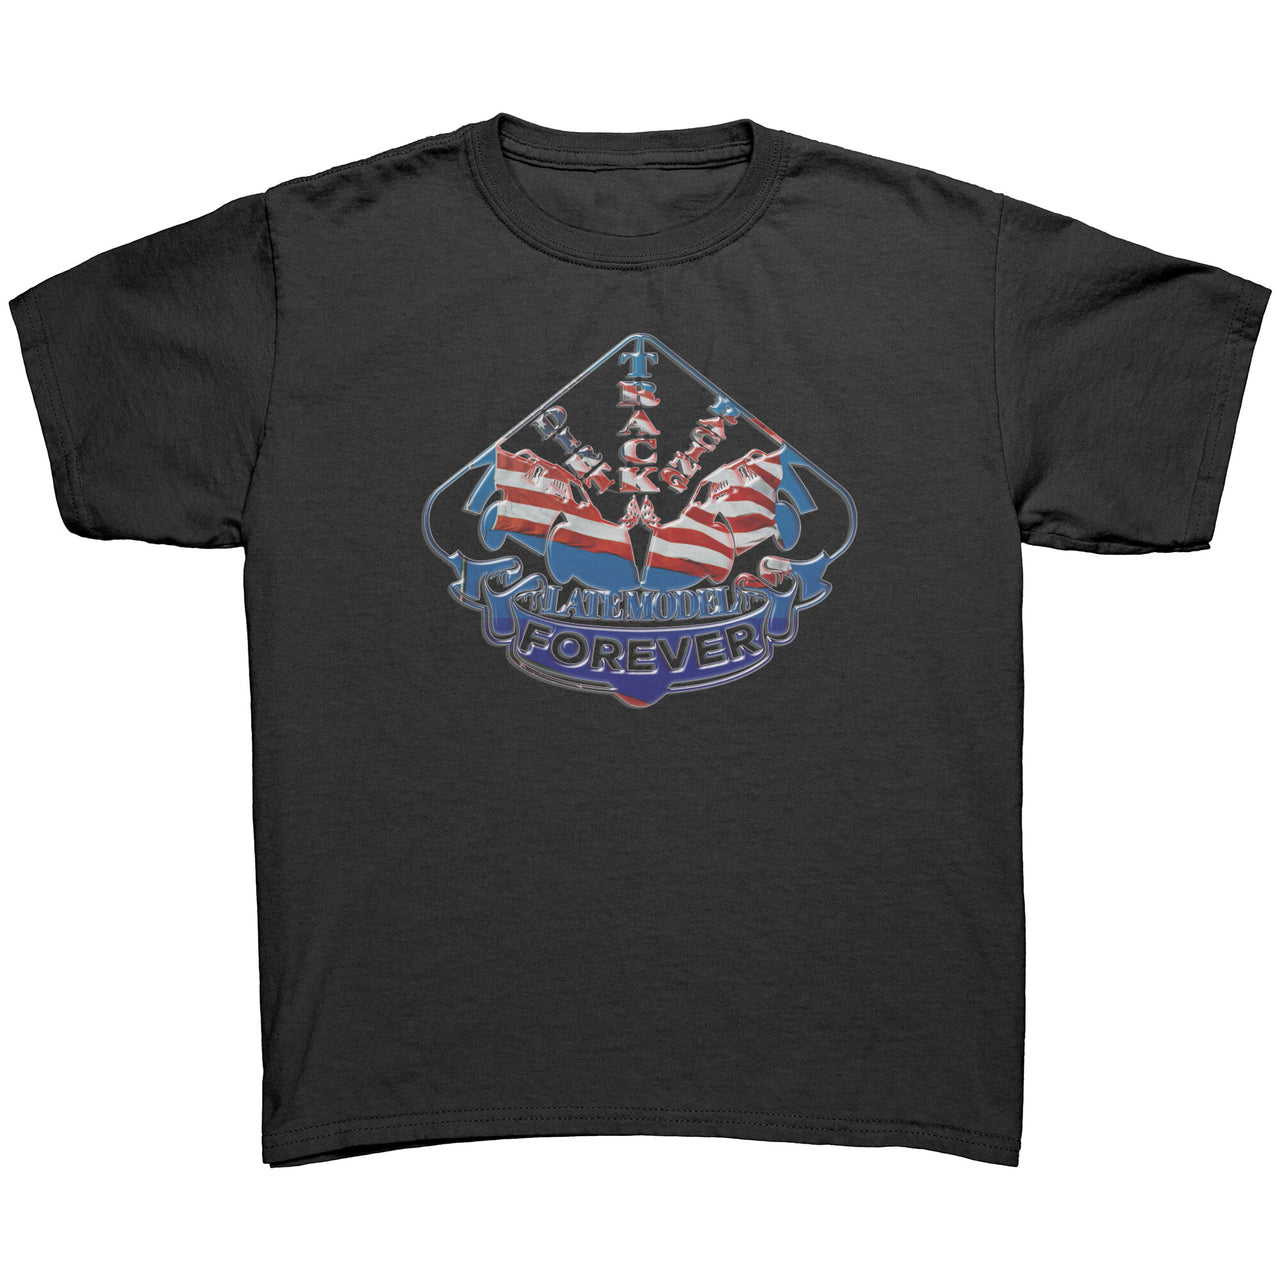 USA Dirt Racing Late Model Forever Youth T-shirts/Hoodies